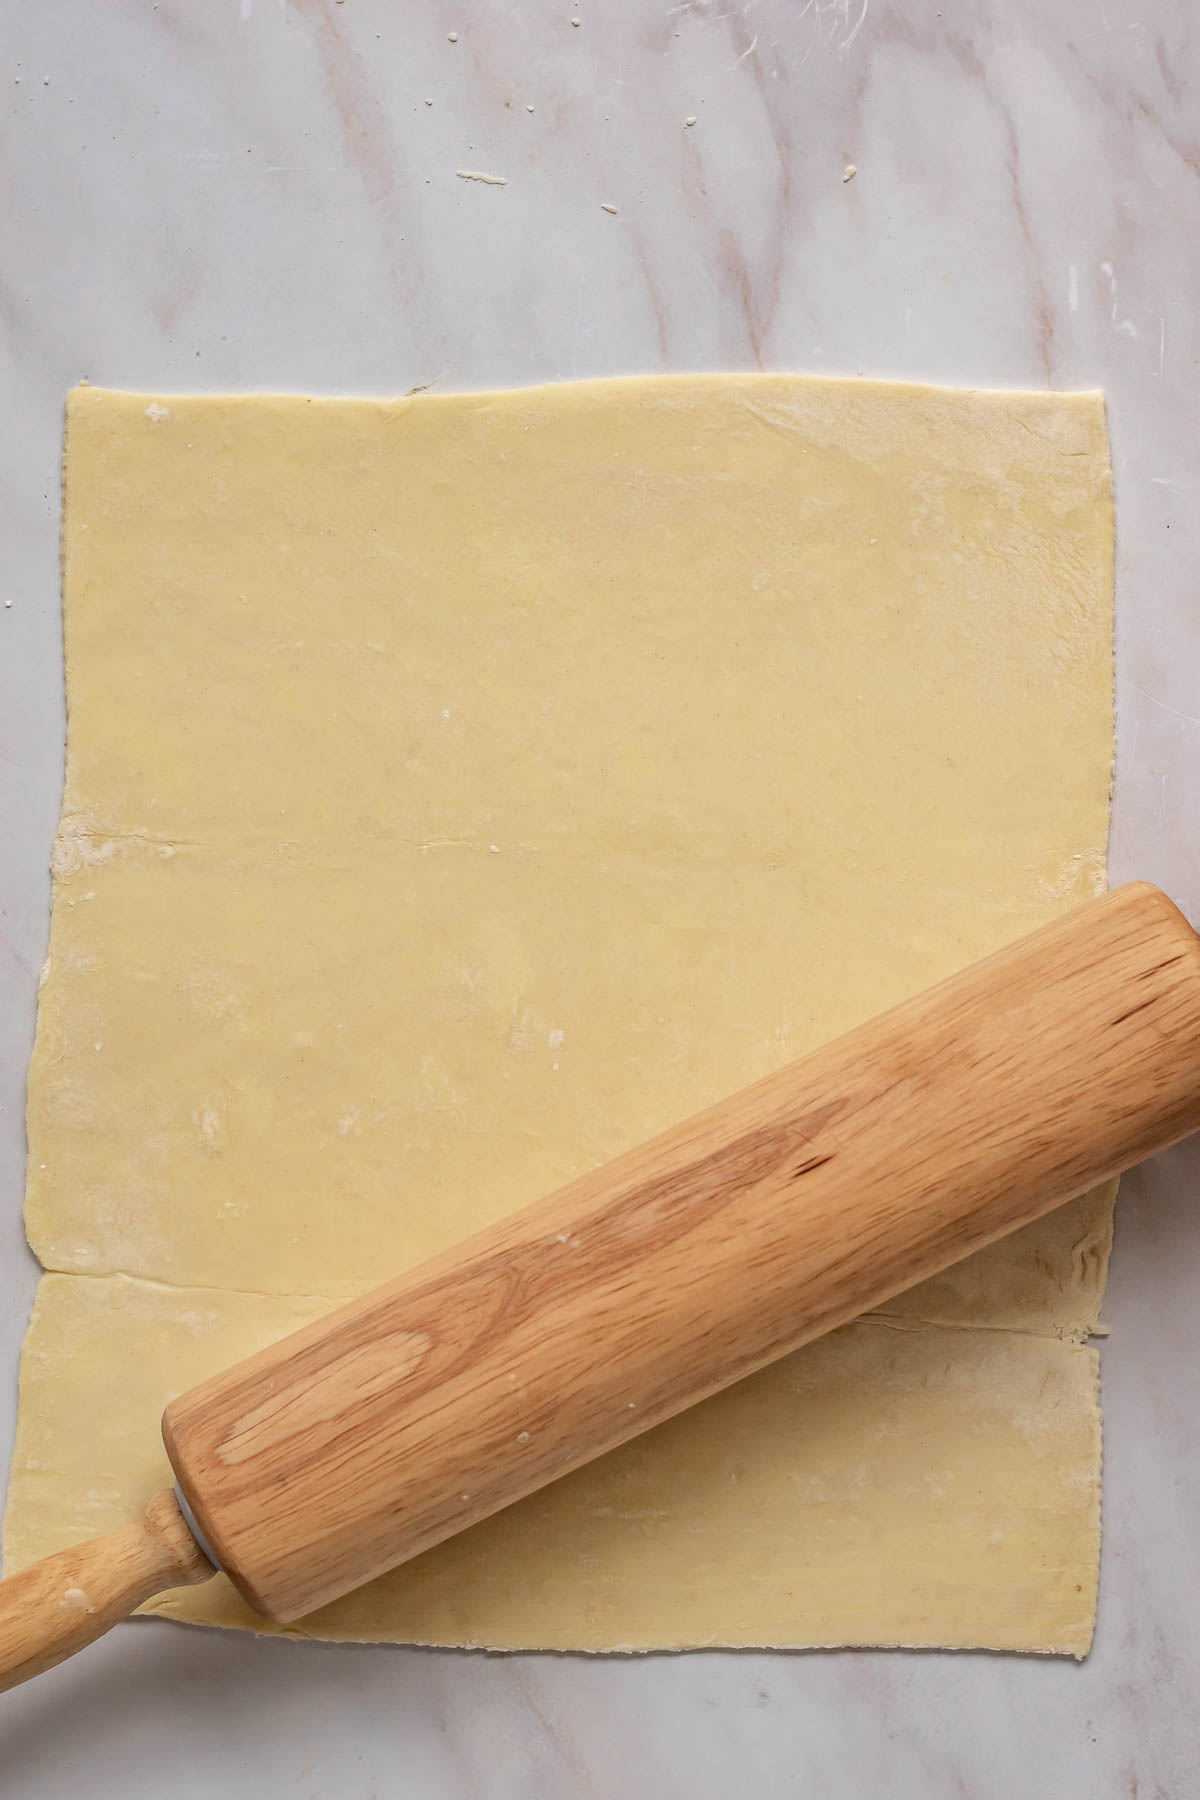 A rolling pins rolls out puff pastry.